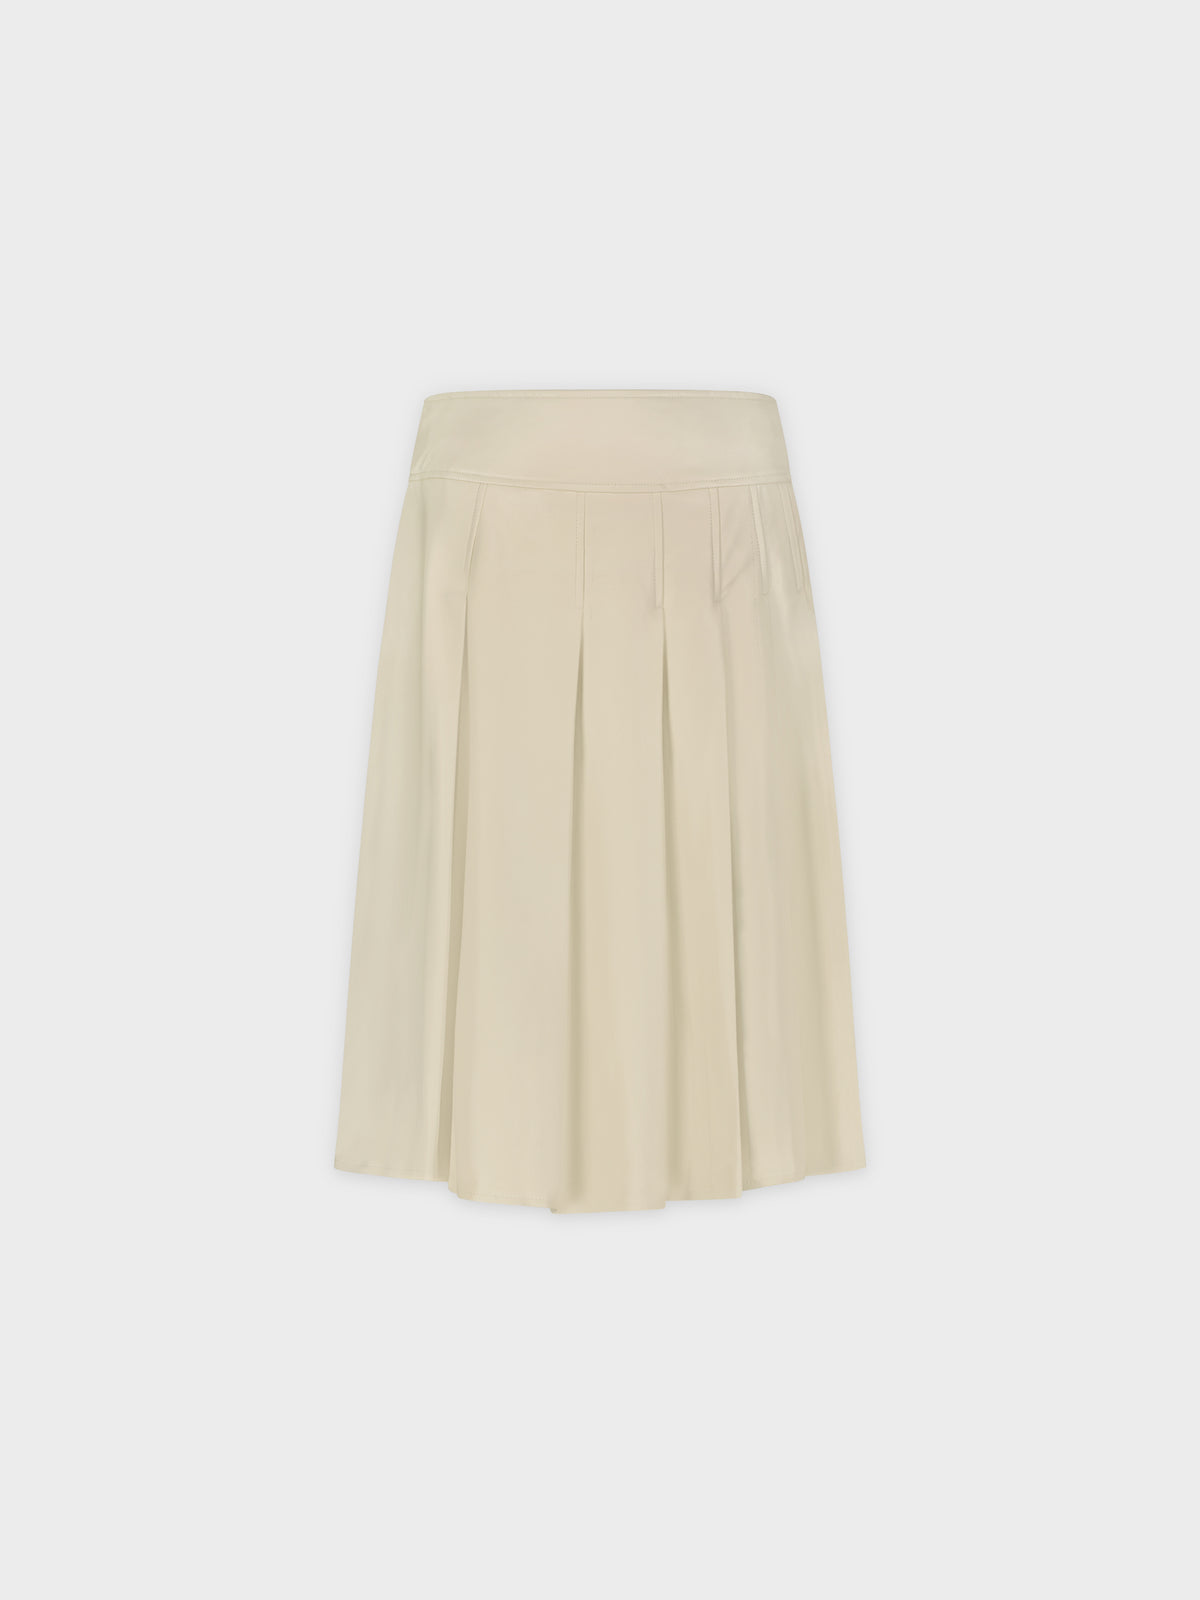 Stitched Pleated Leather Skirt-Bone